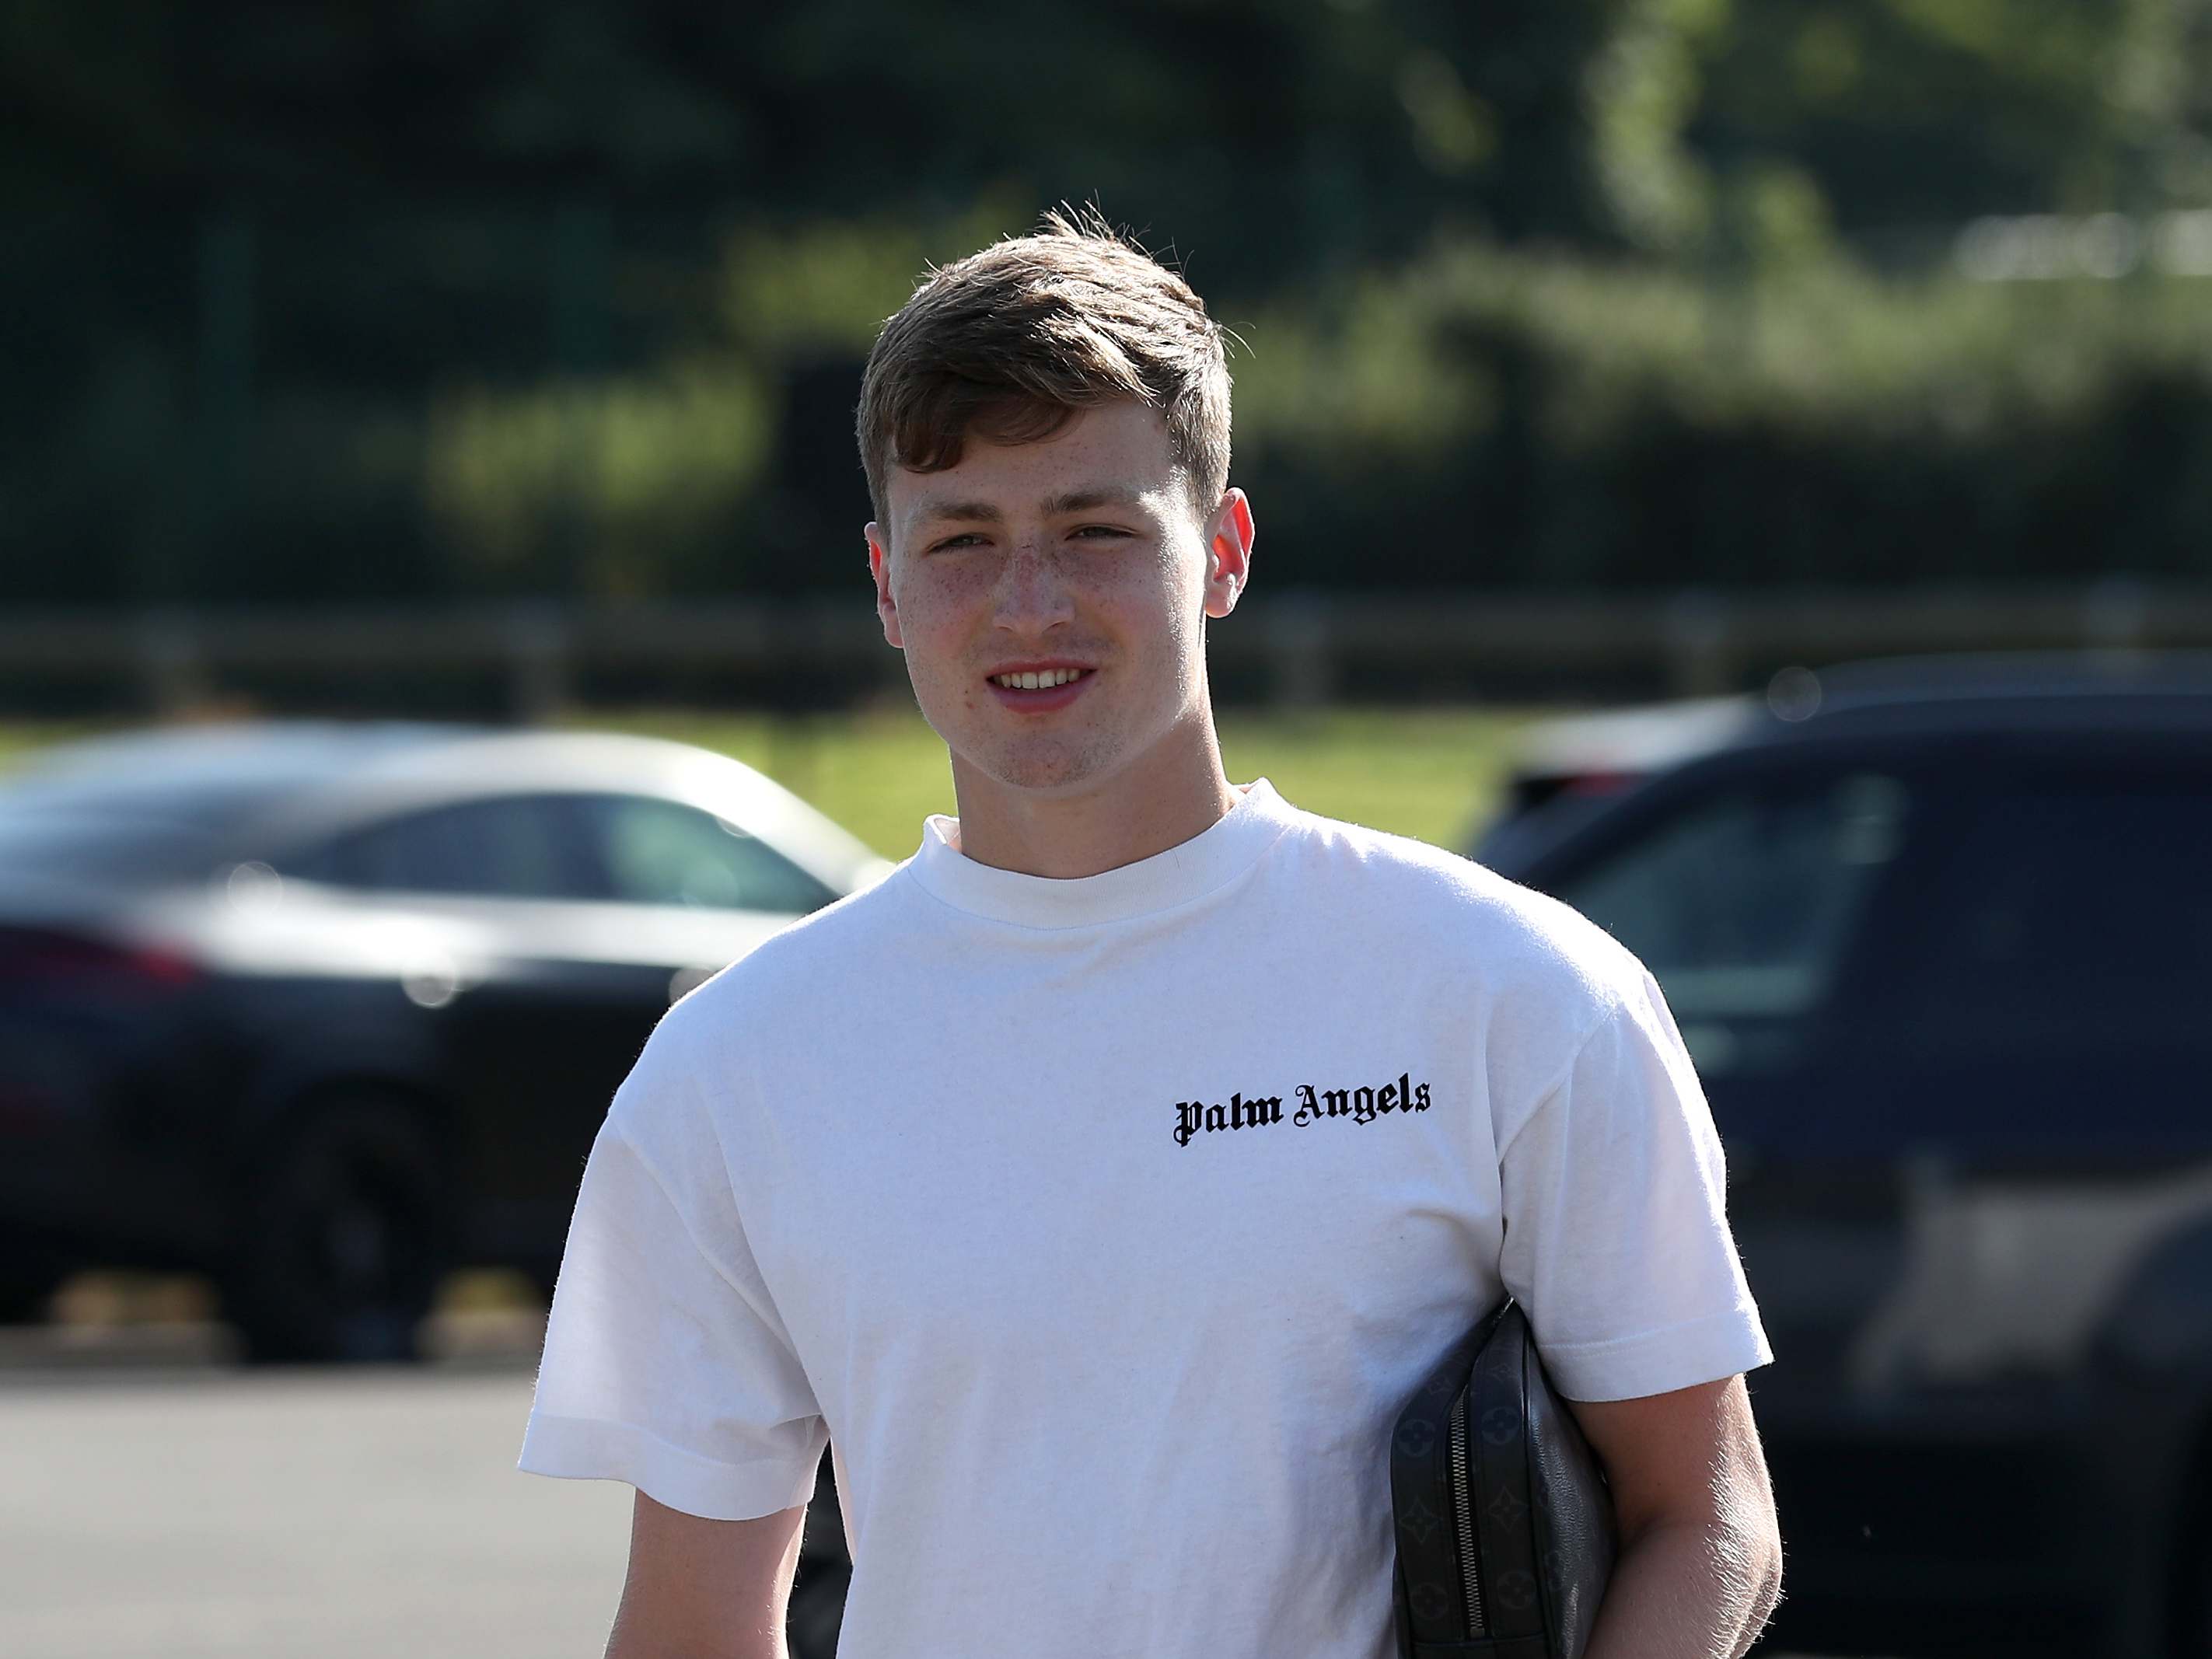 Zac Ashworth arriving at the training ground smiling 